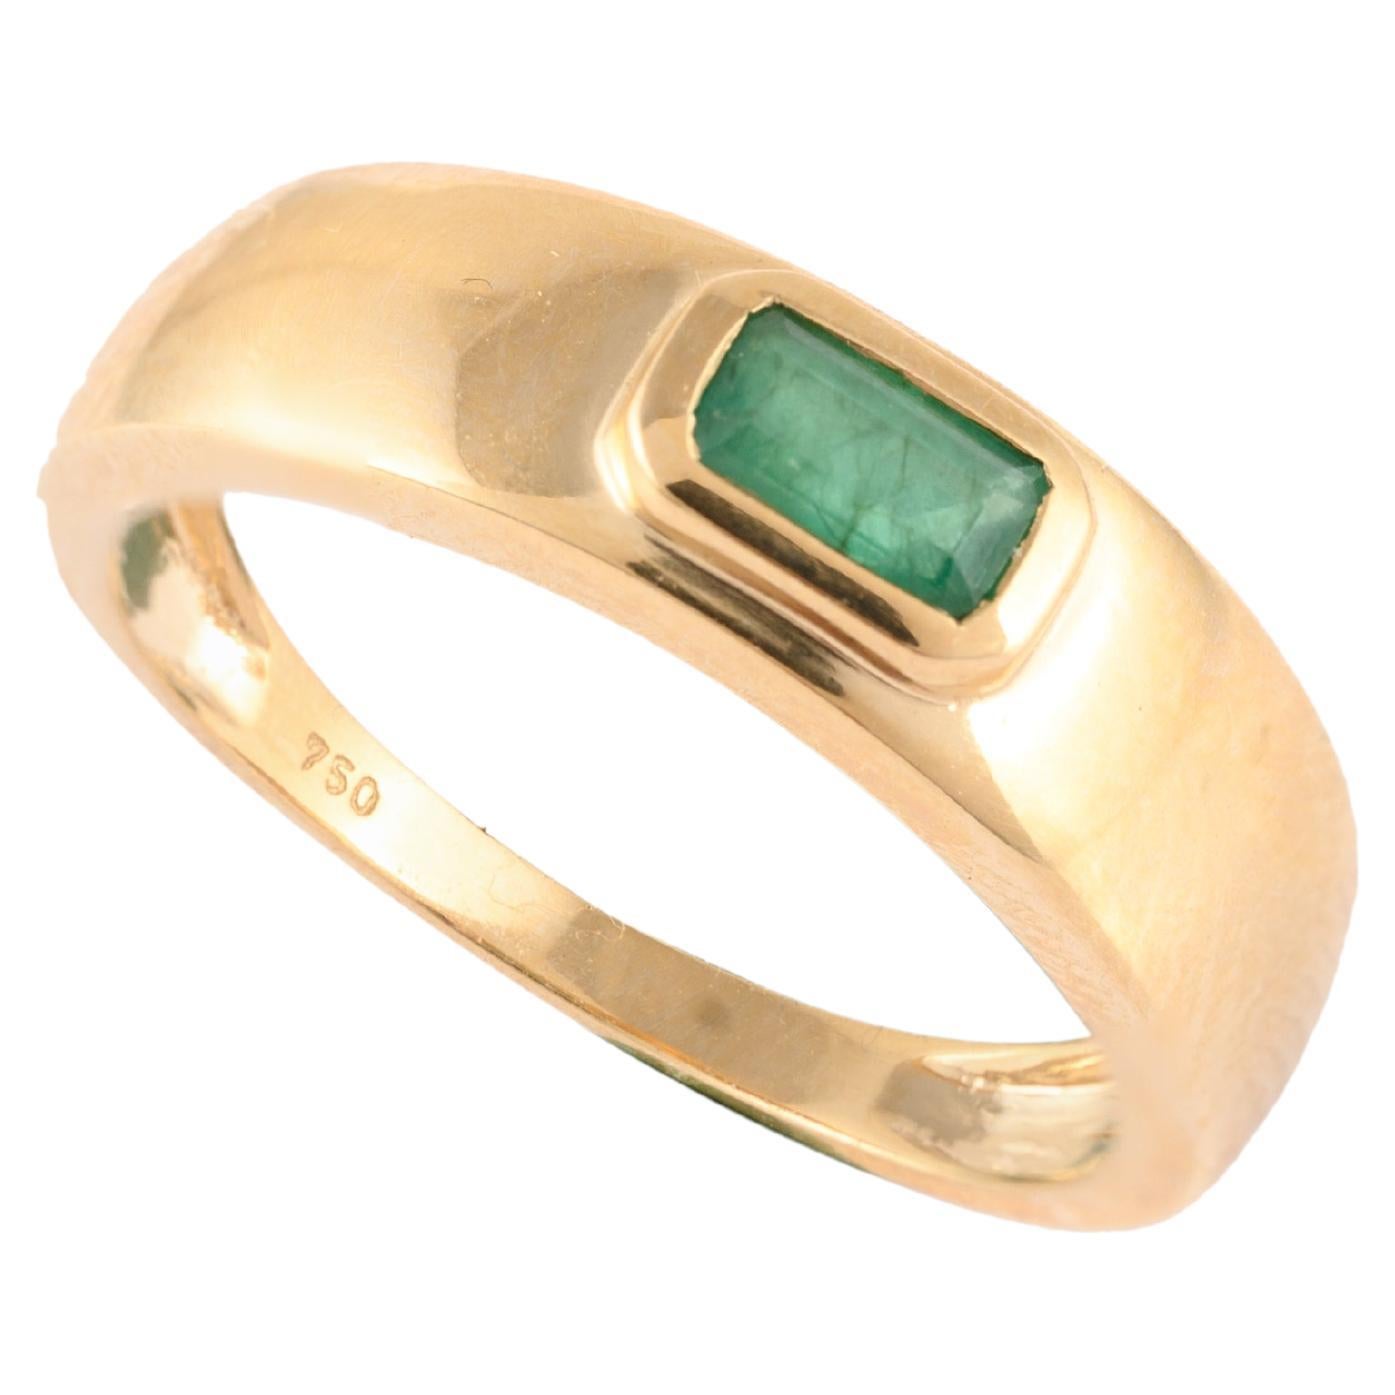 Unisex Natural Baguette Cut Emerald May Birthstone Ring in 18k Yellow Gold